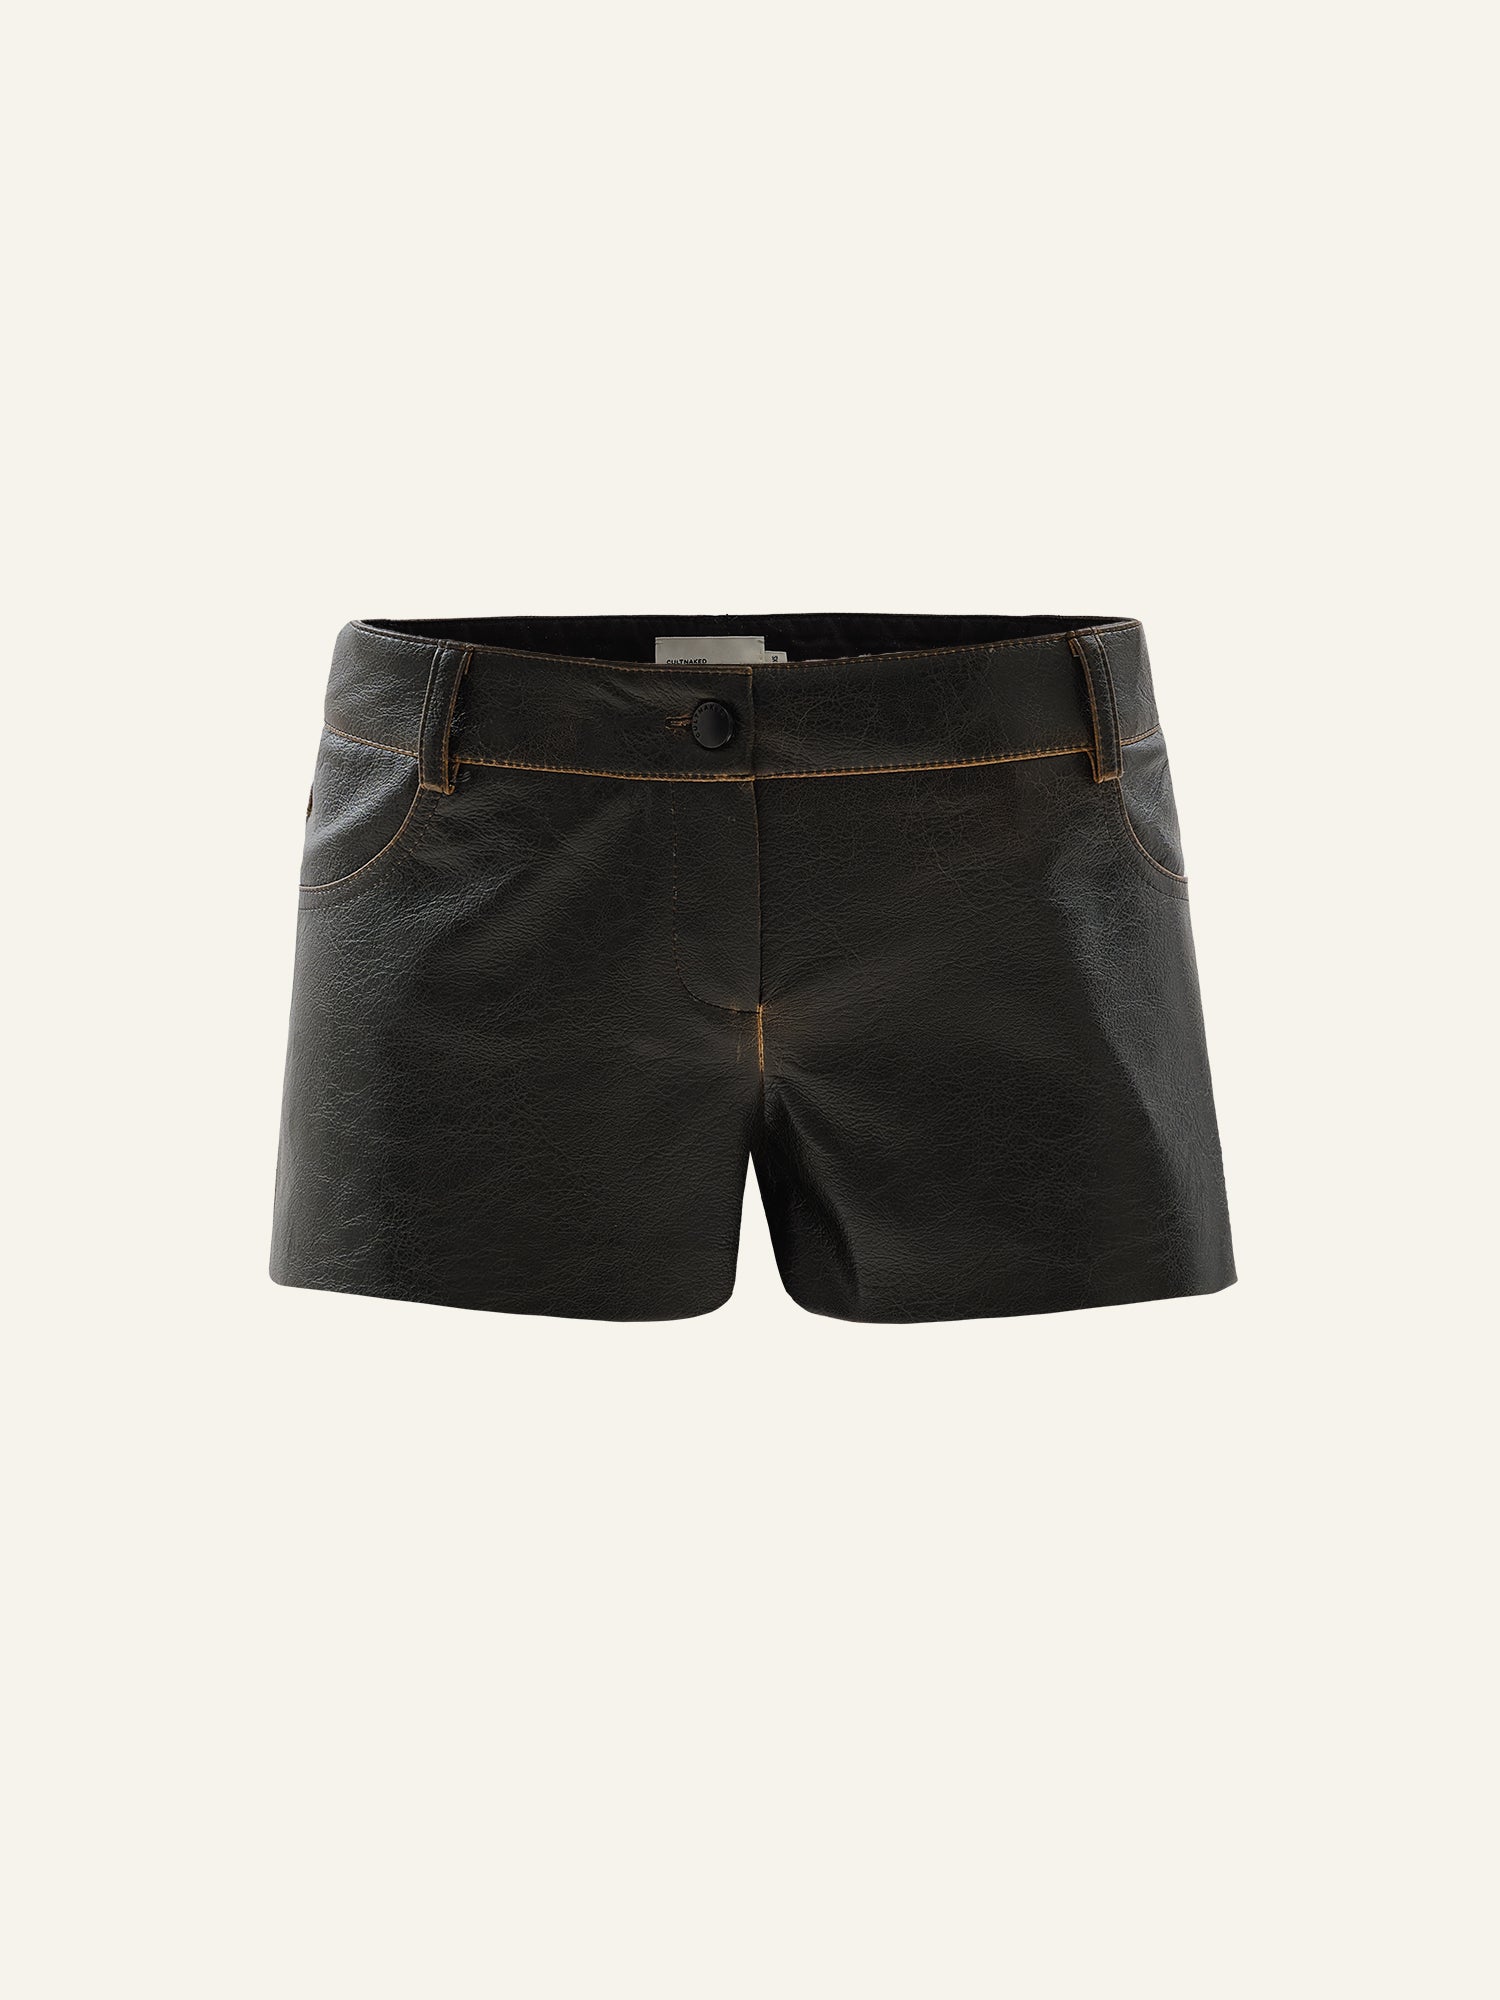 Product photo of a brown vegan  leather mini shorts with mid rise